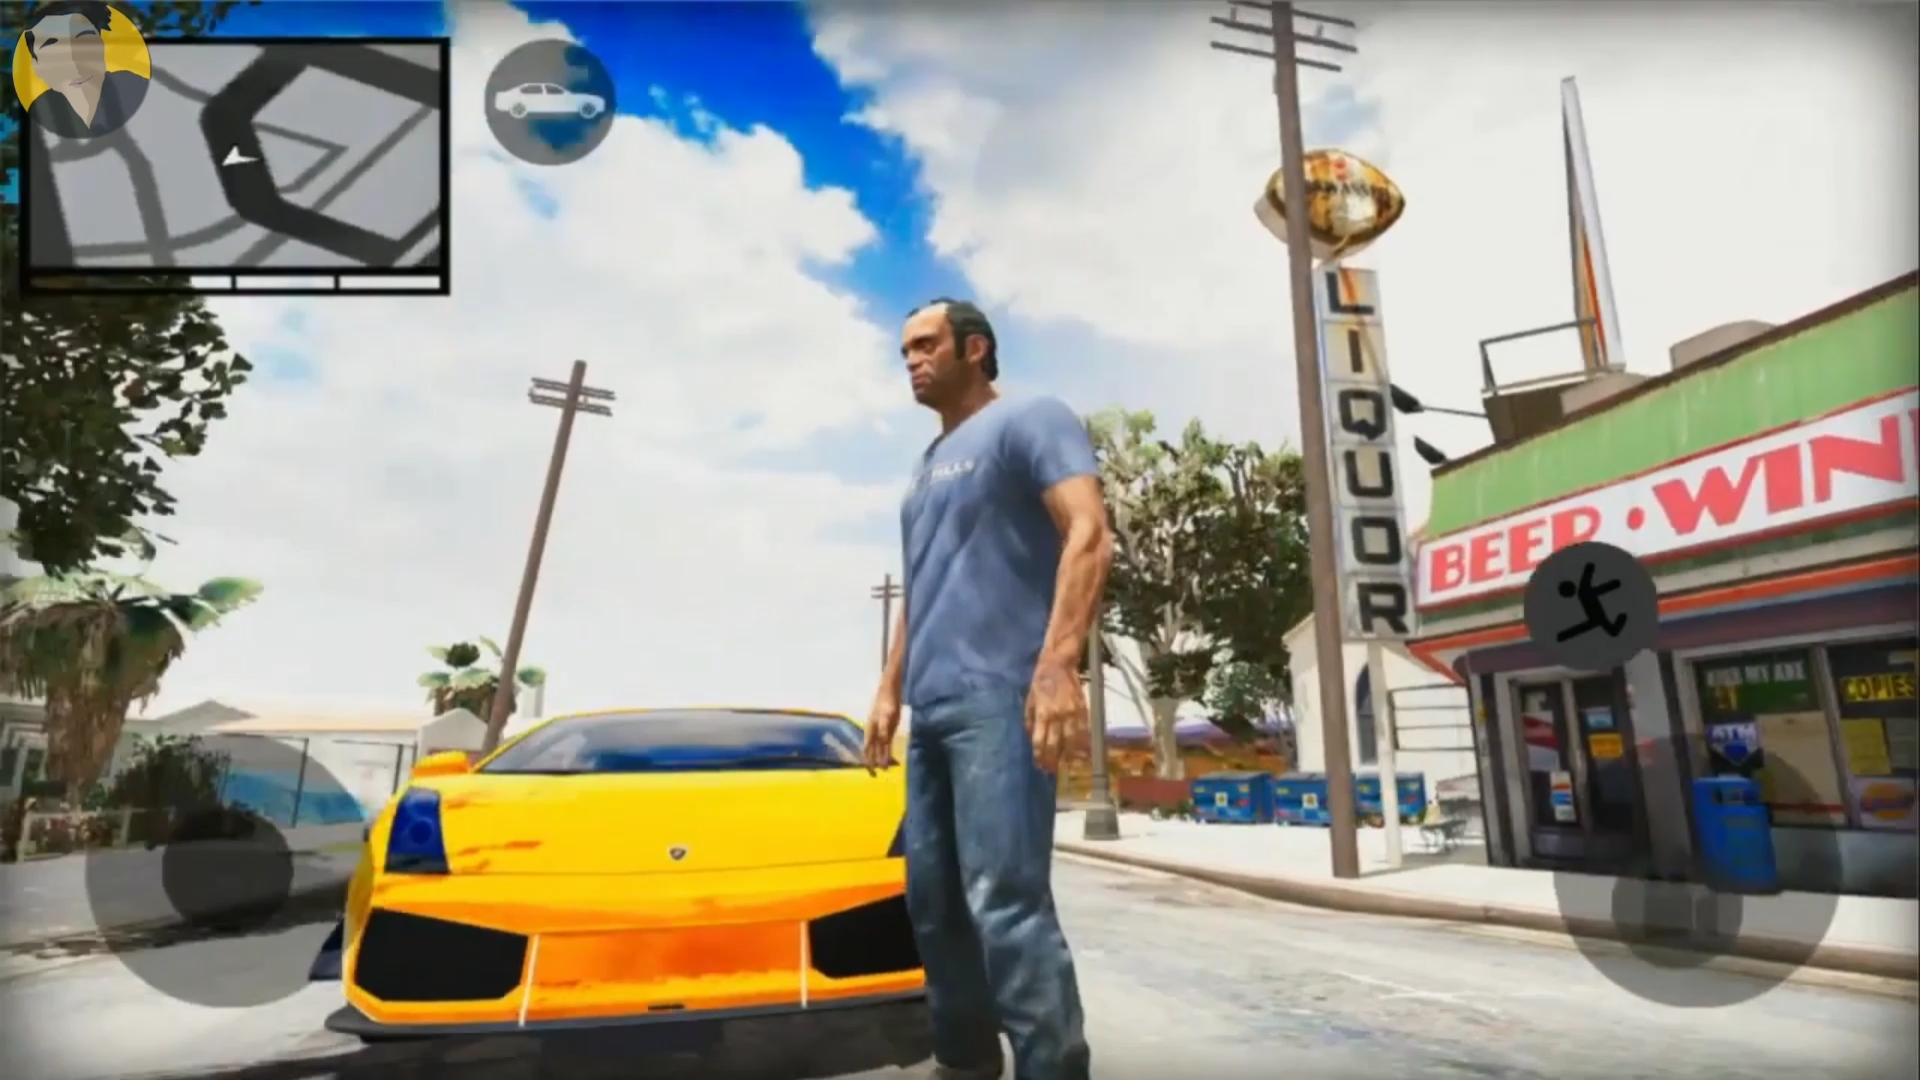 download gta 5 full game for android without verification